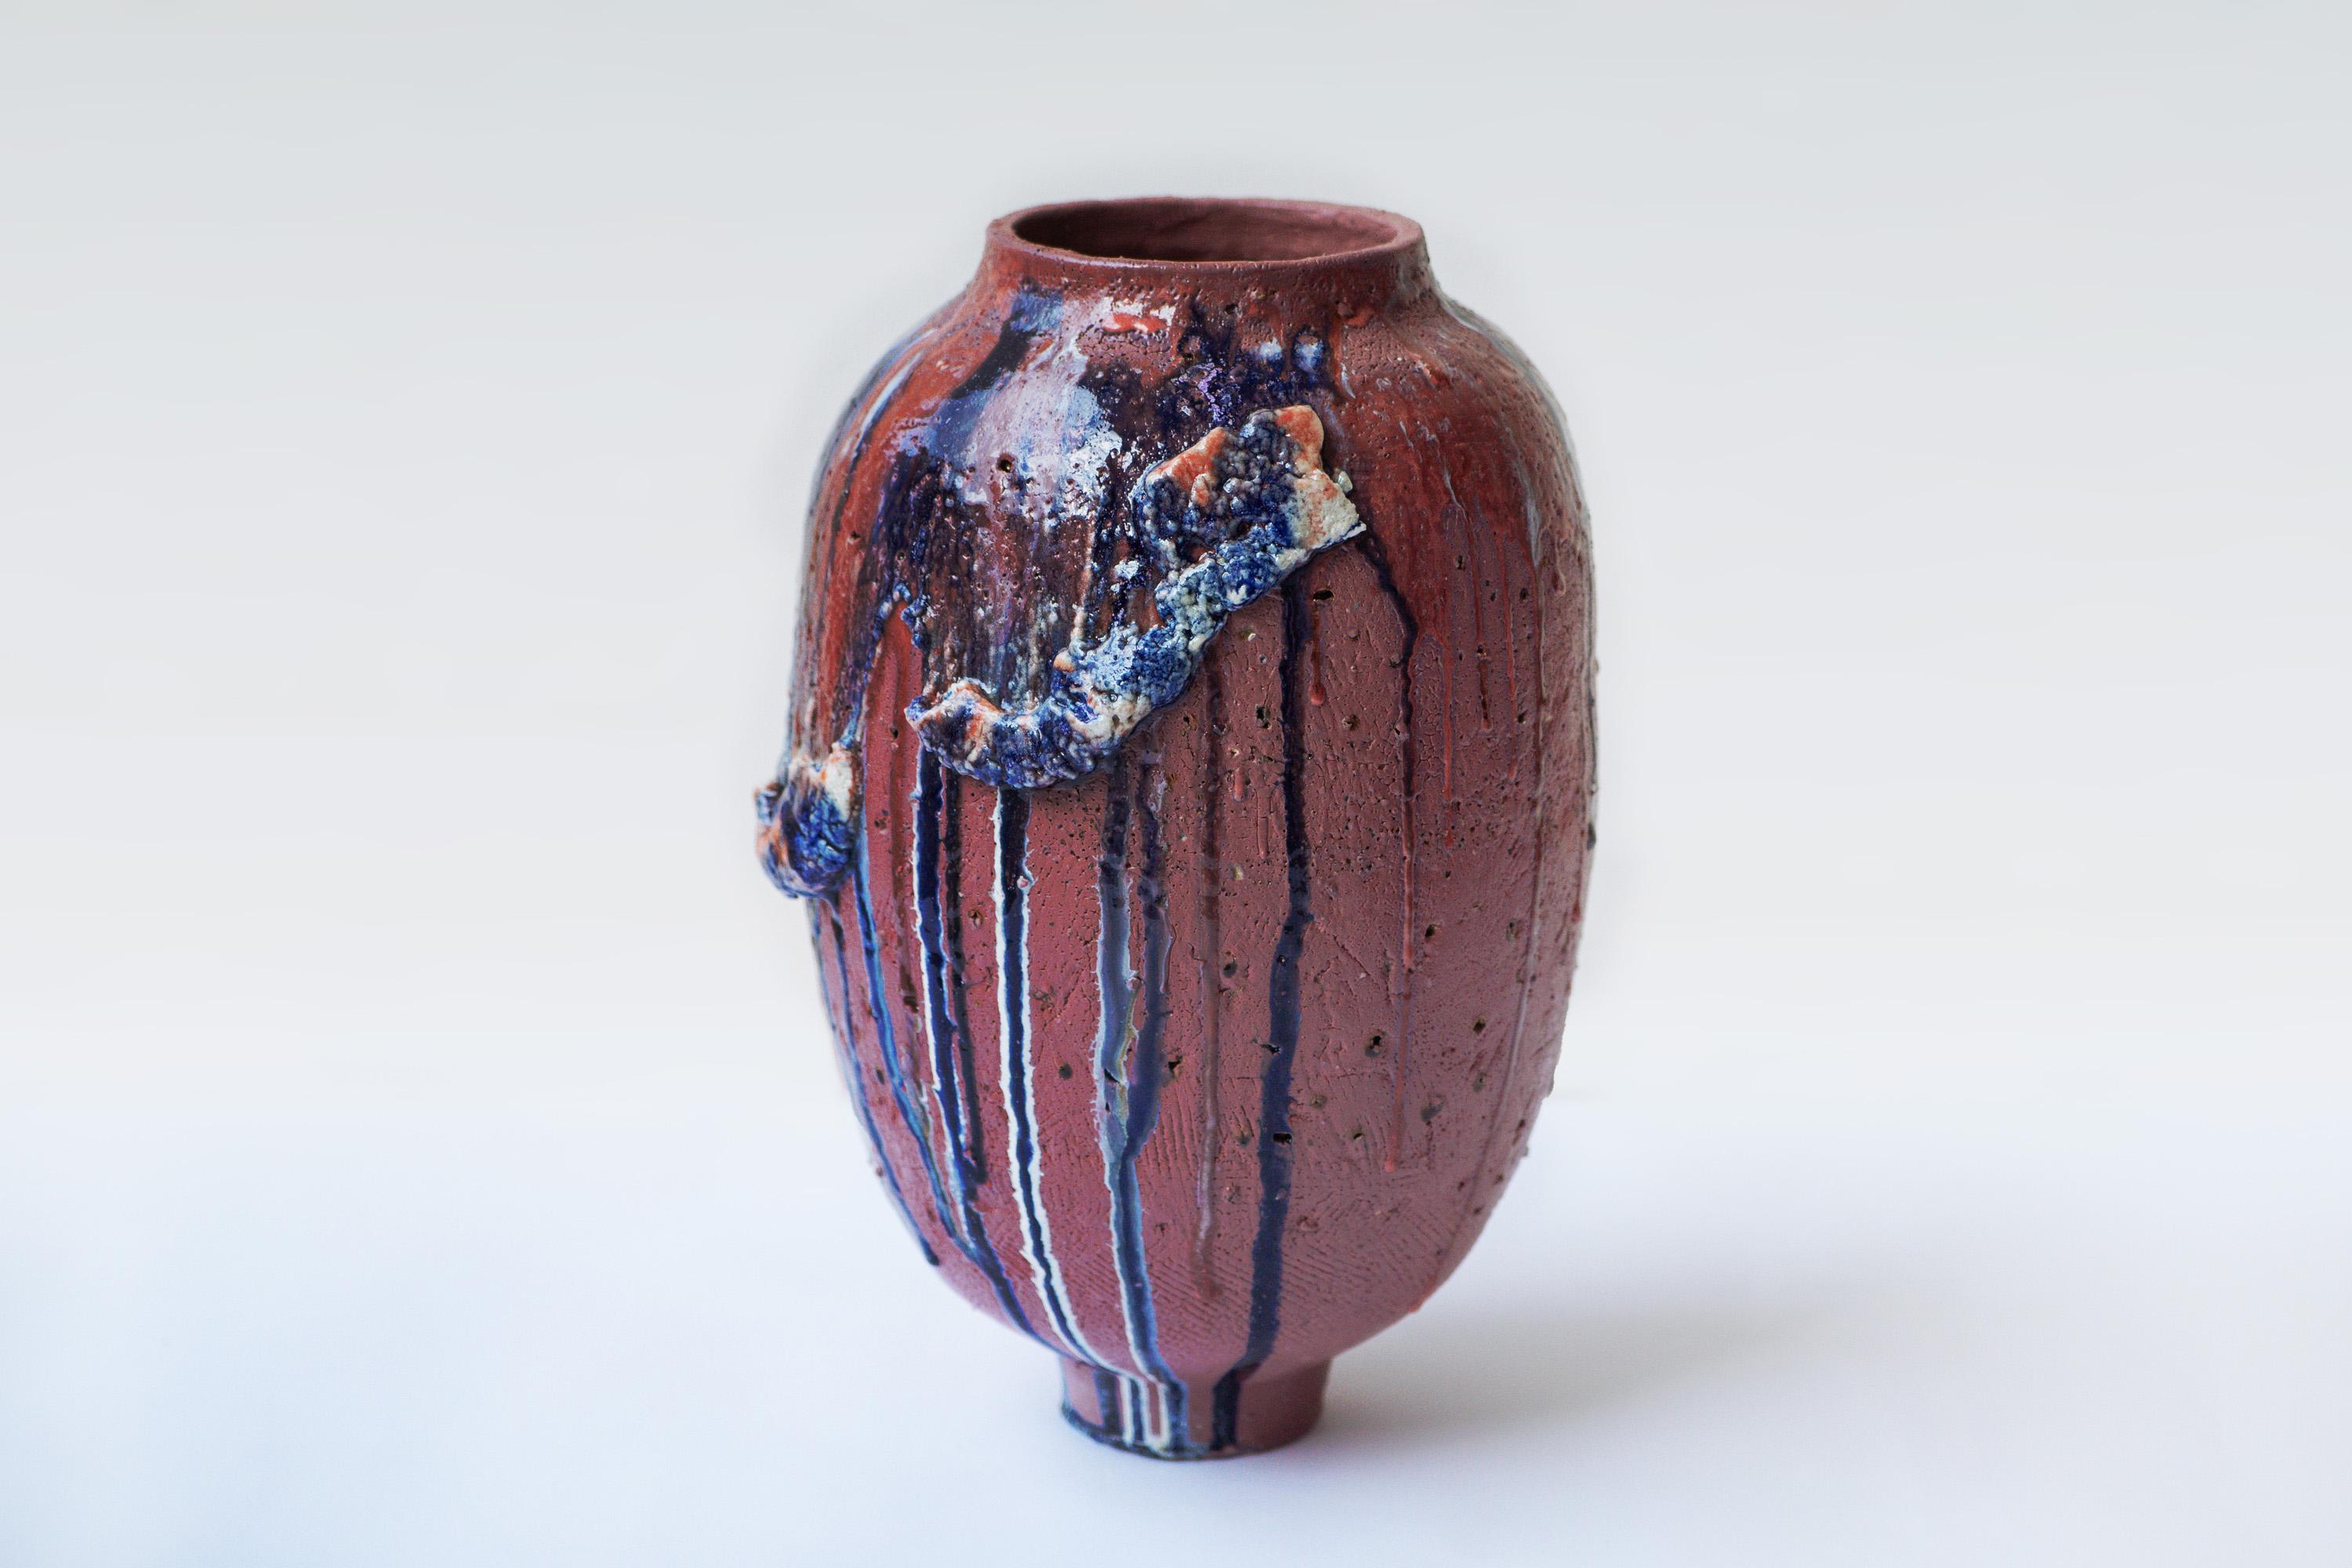 Stoneware blue twin vase by Arina Antonova
2020
Dimensions: H 50 x D 30 cm
Materials: stoneware, porcelain, glaze

Born in Sewastopol (Crimea), I was surrounded by the natural variety of the coastal Black Sea views with rocky beaches and